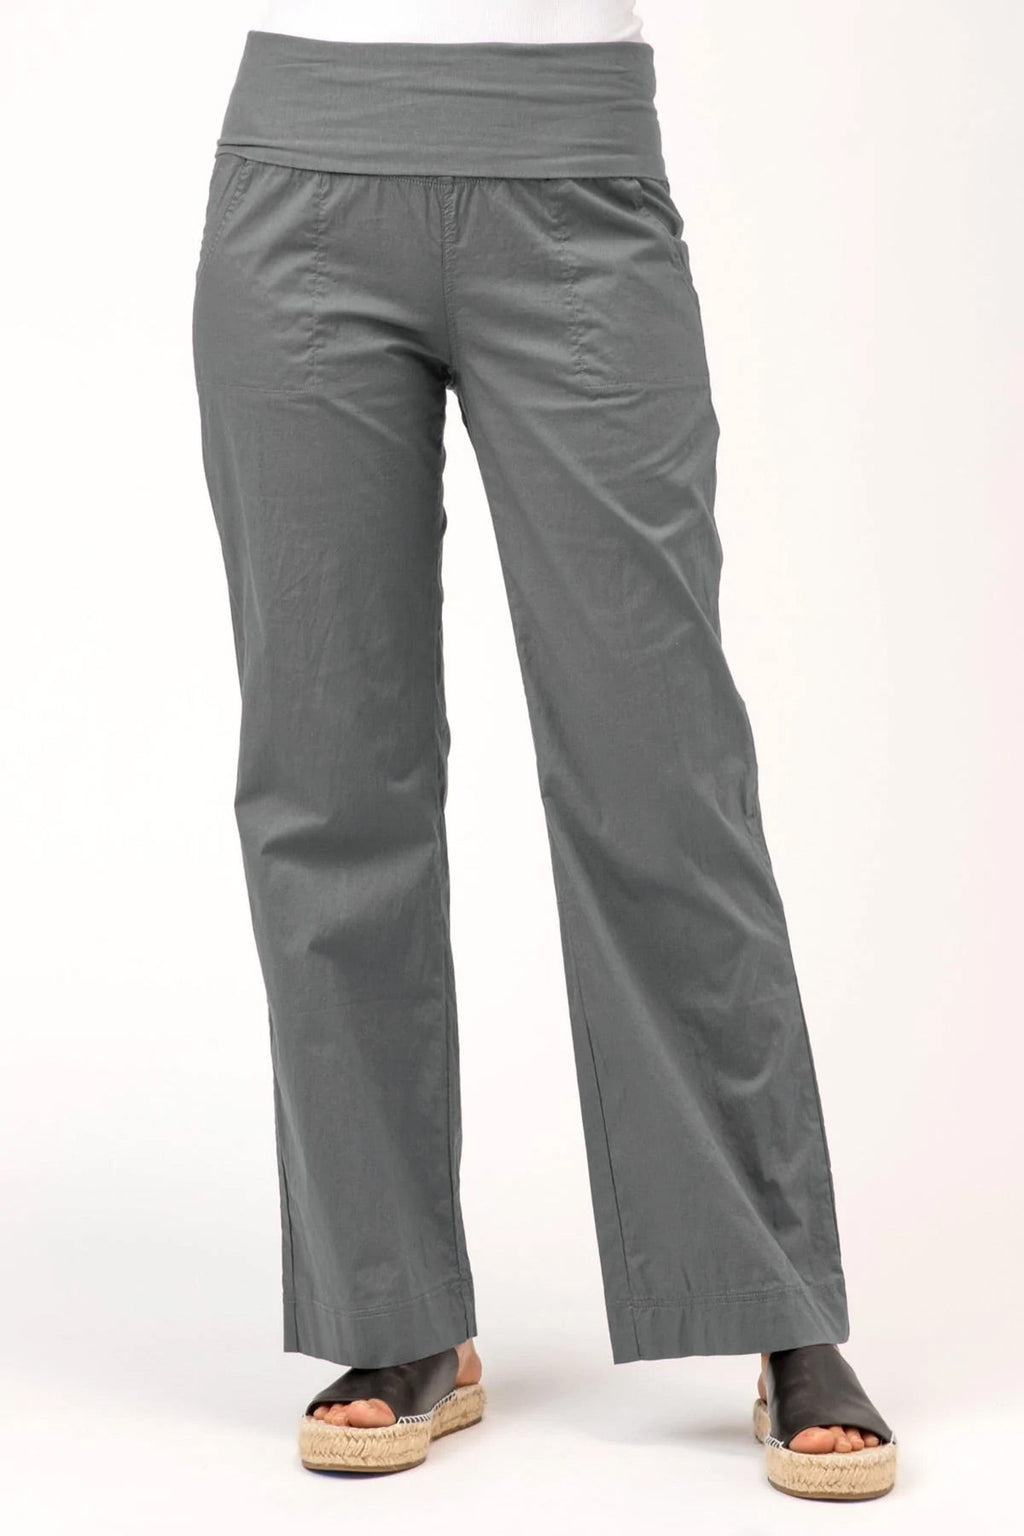 4-Pocket Fold Over Pant in Charcoal – XCVI